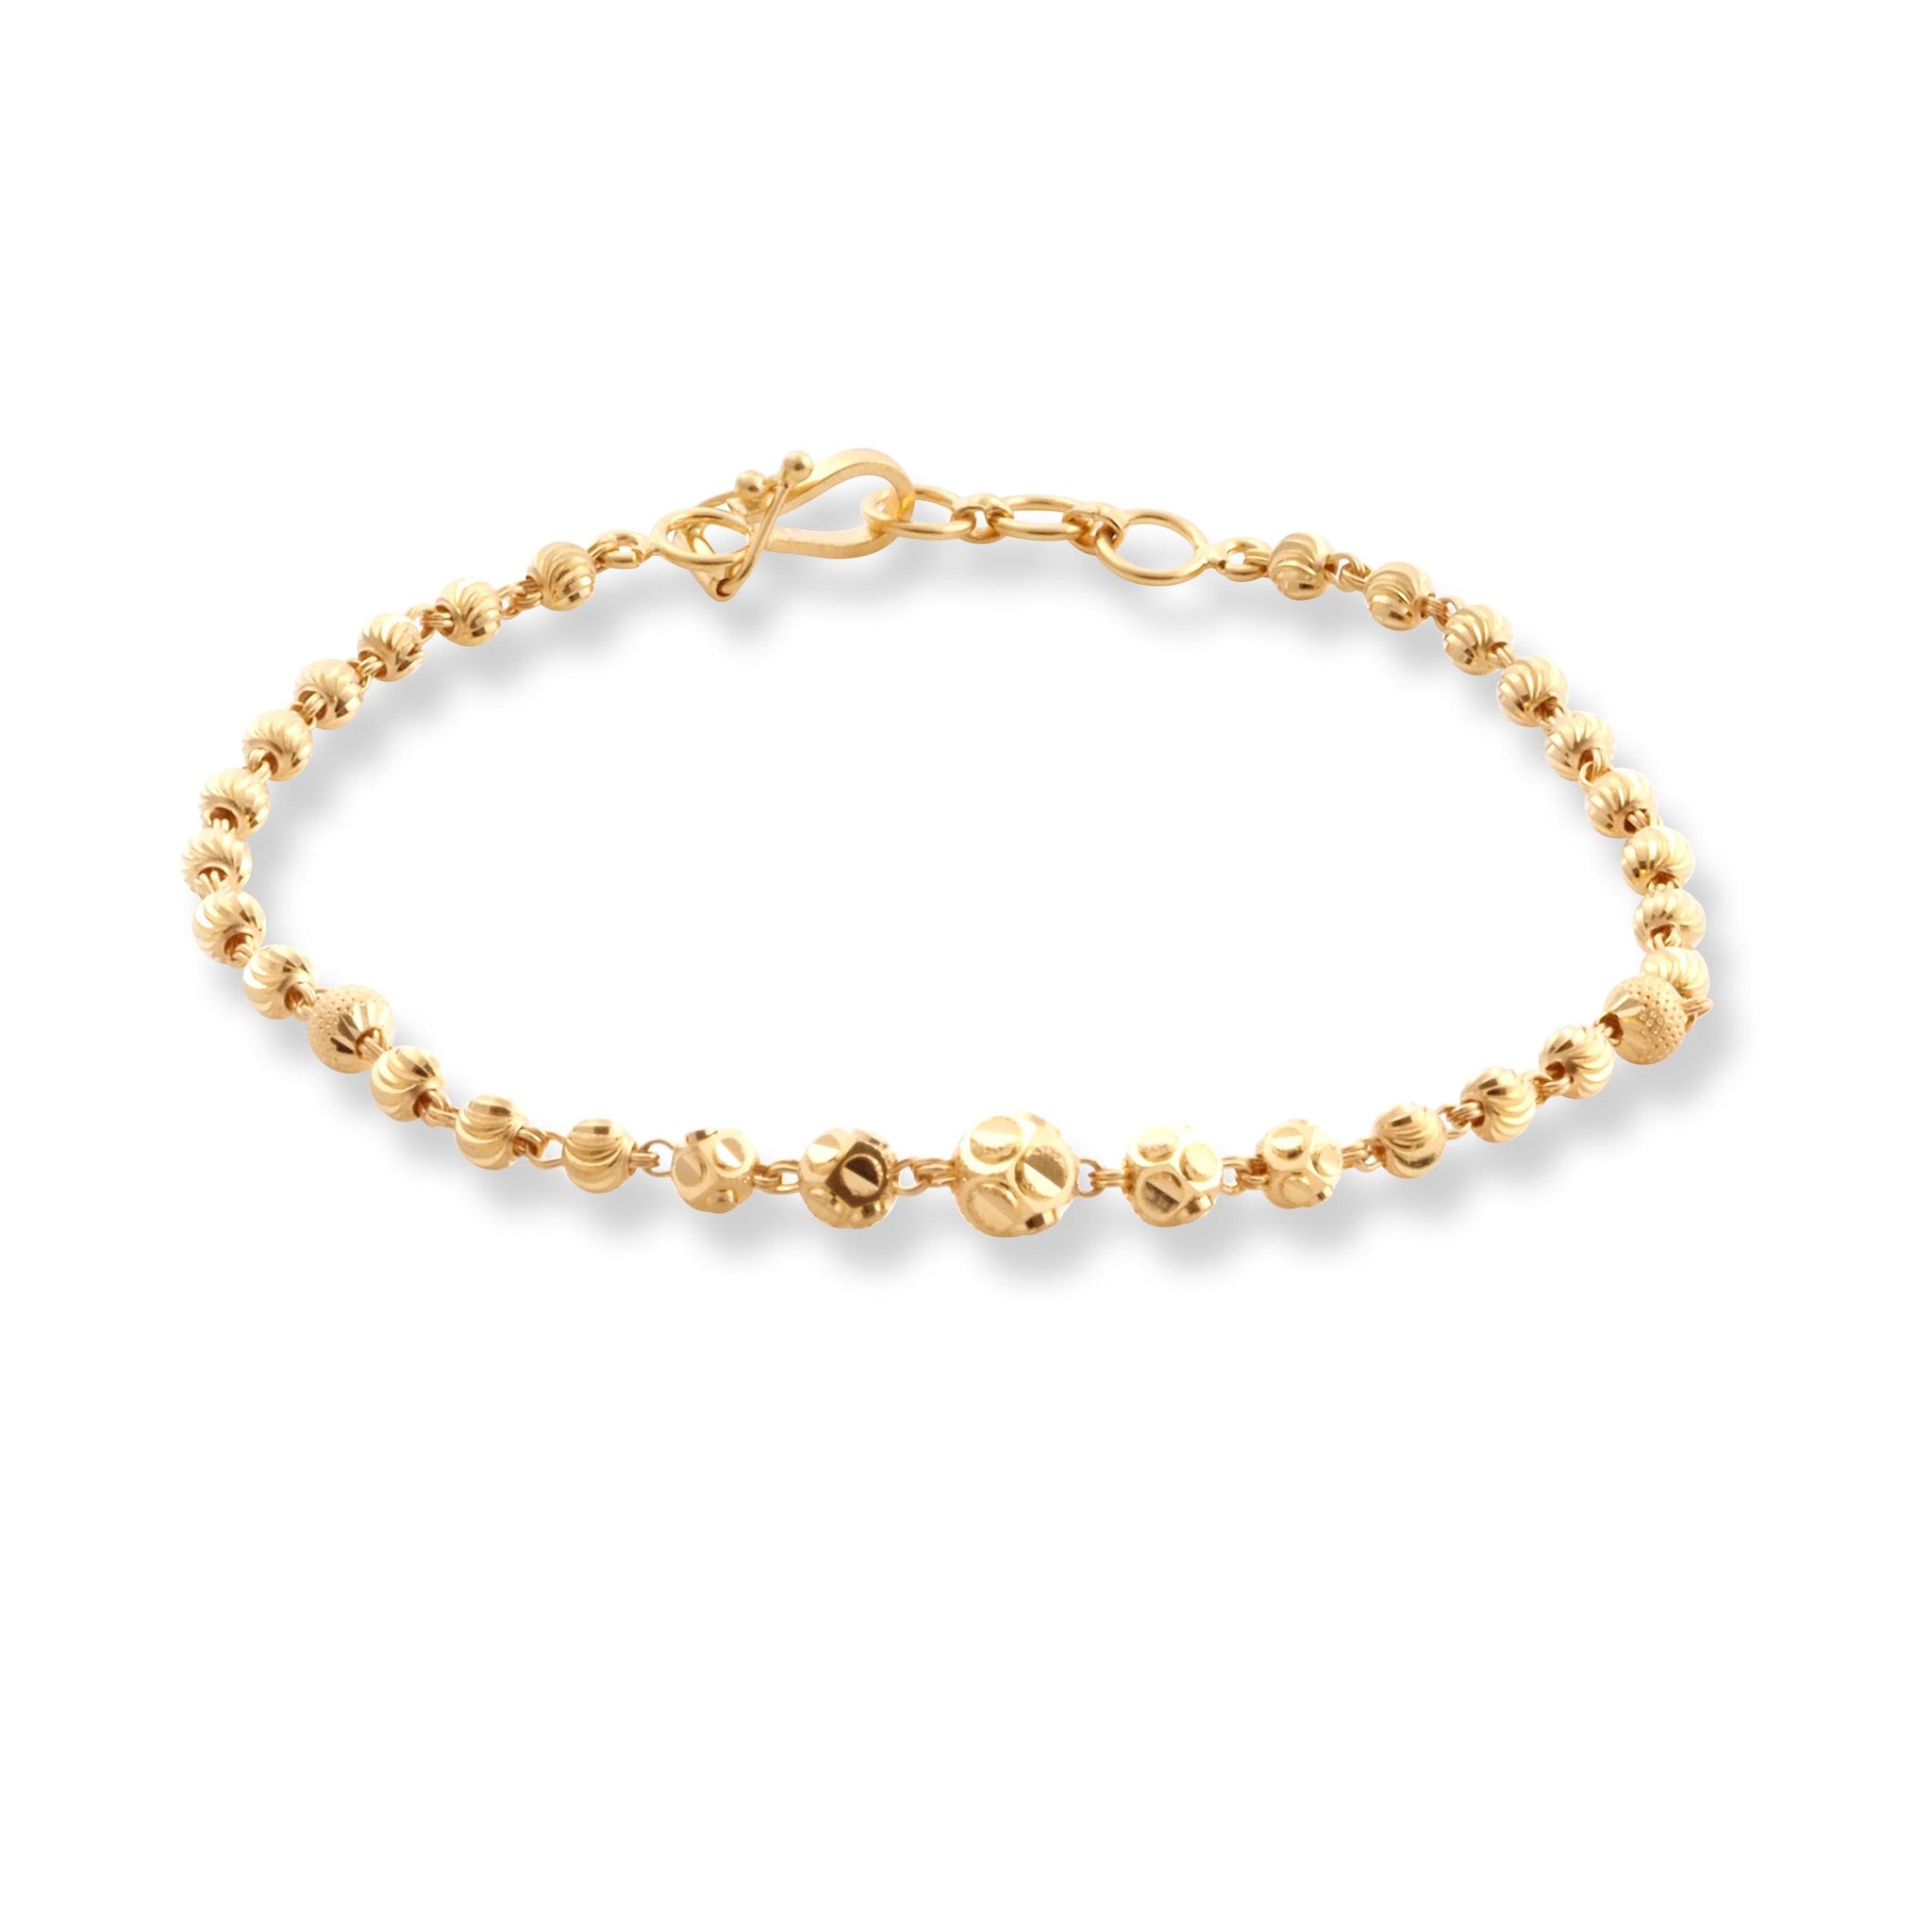 22ct Gold Bracelet with Diamond Cut Beads and Hook Clasp LBR-8514